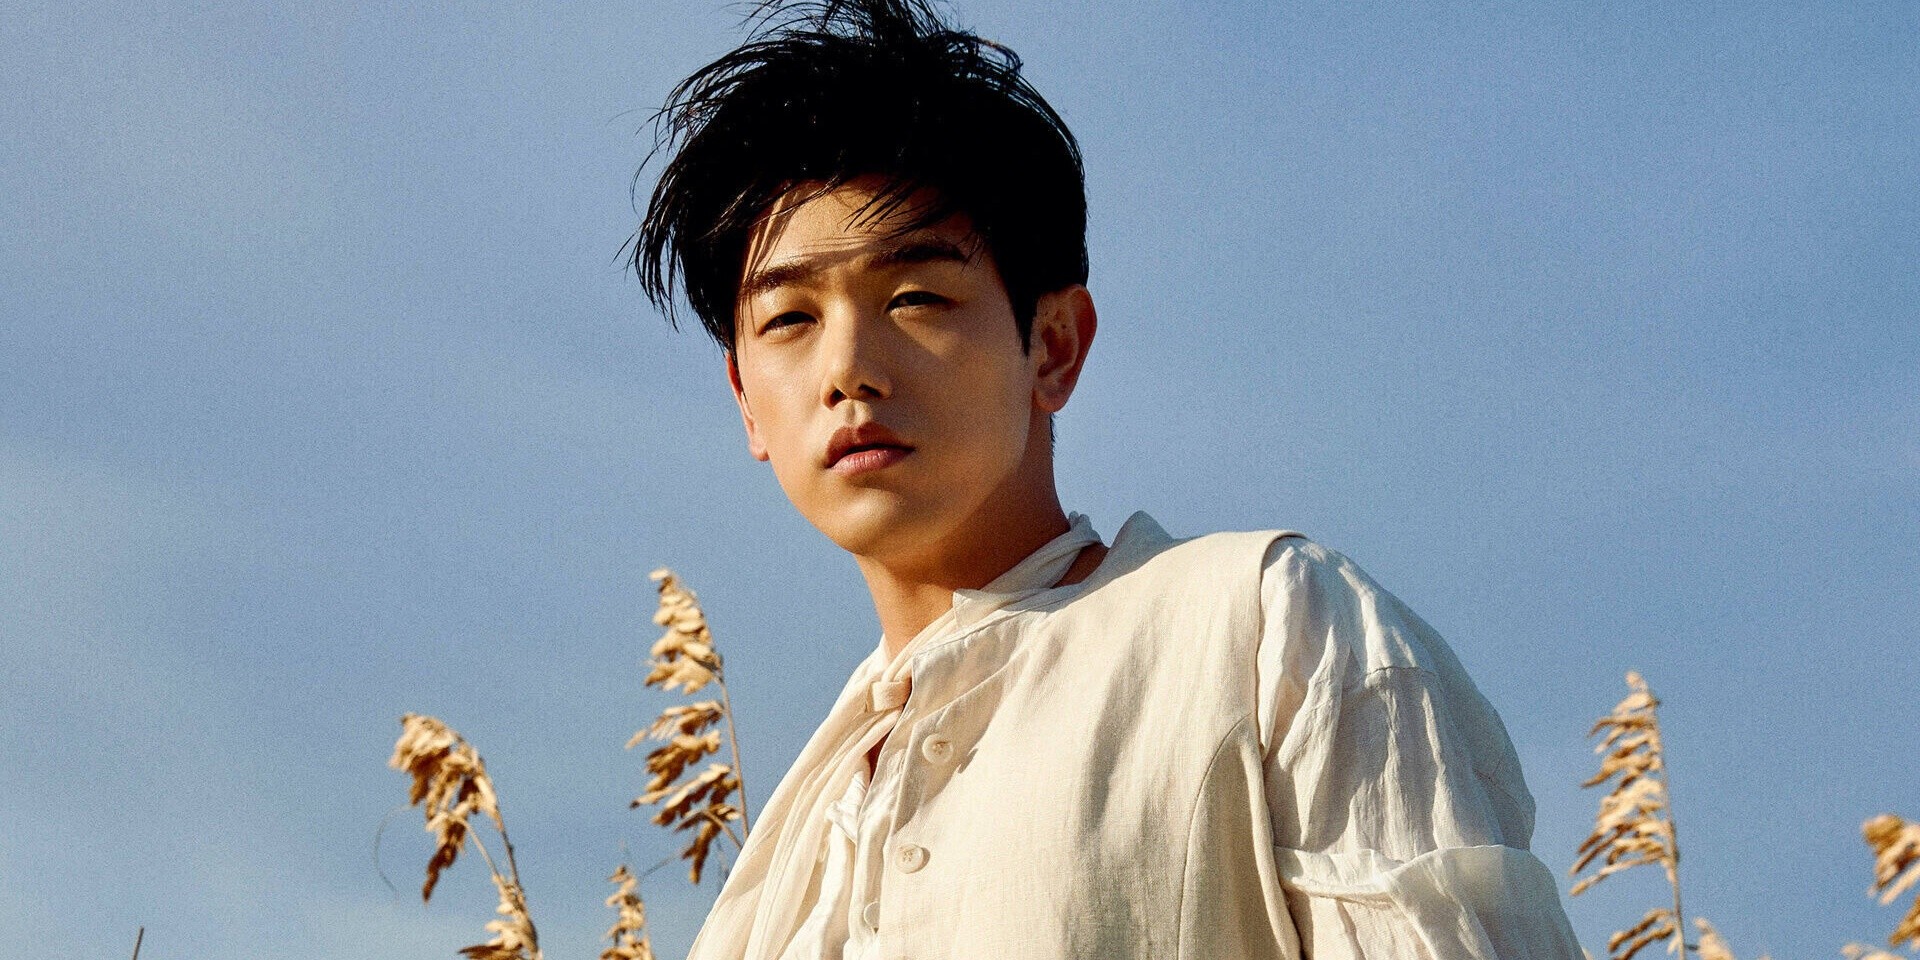 Eric Nam announces 'There and Back Again' Asia tour, confirms concerts in Manila, Singapore, Taipei, and more